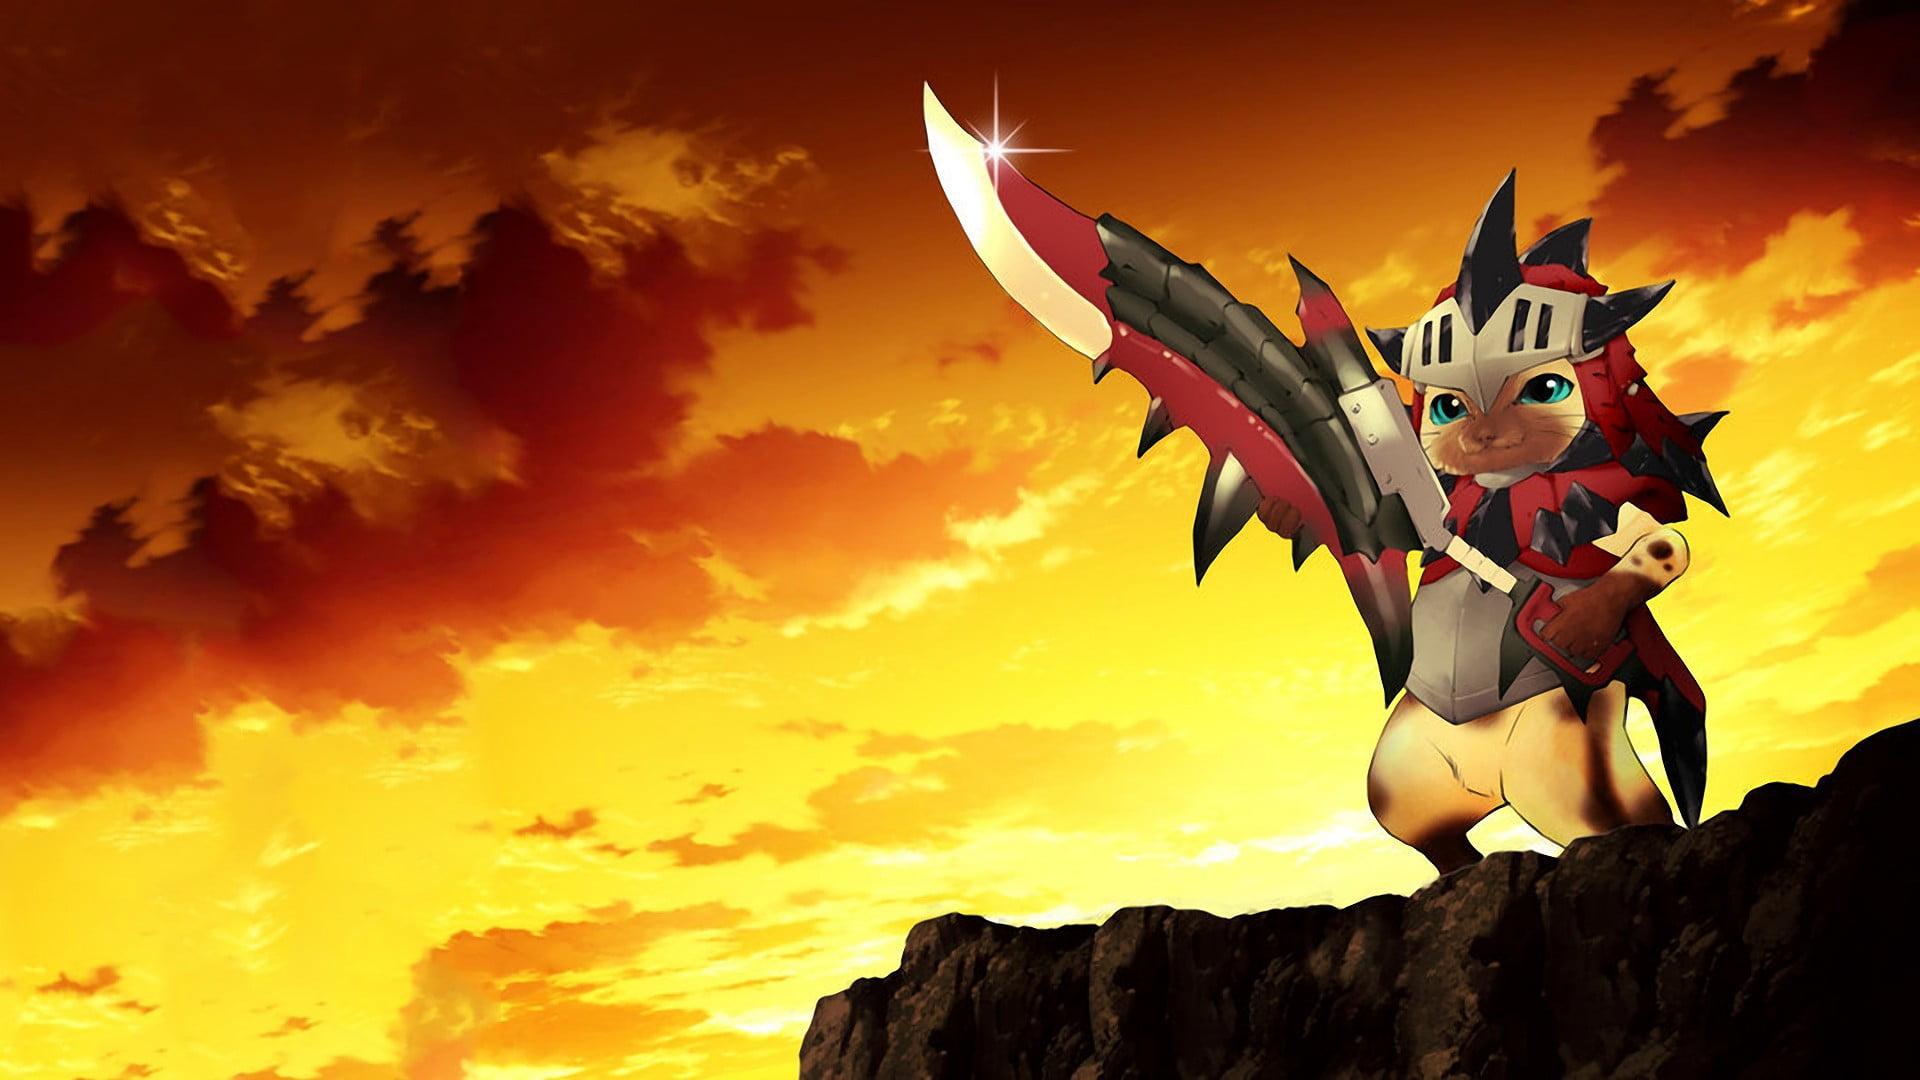 cat wearing red armor holding red and black sword HD wallpaper, Monster Hunter